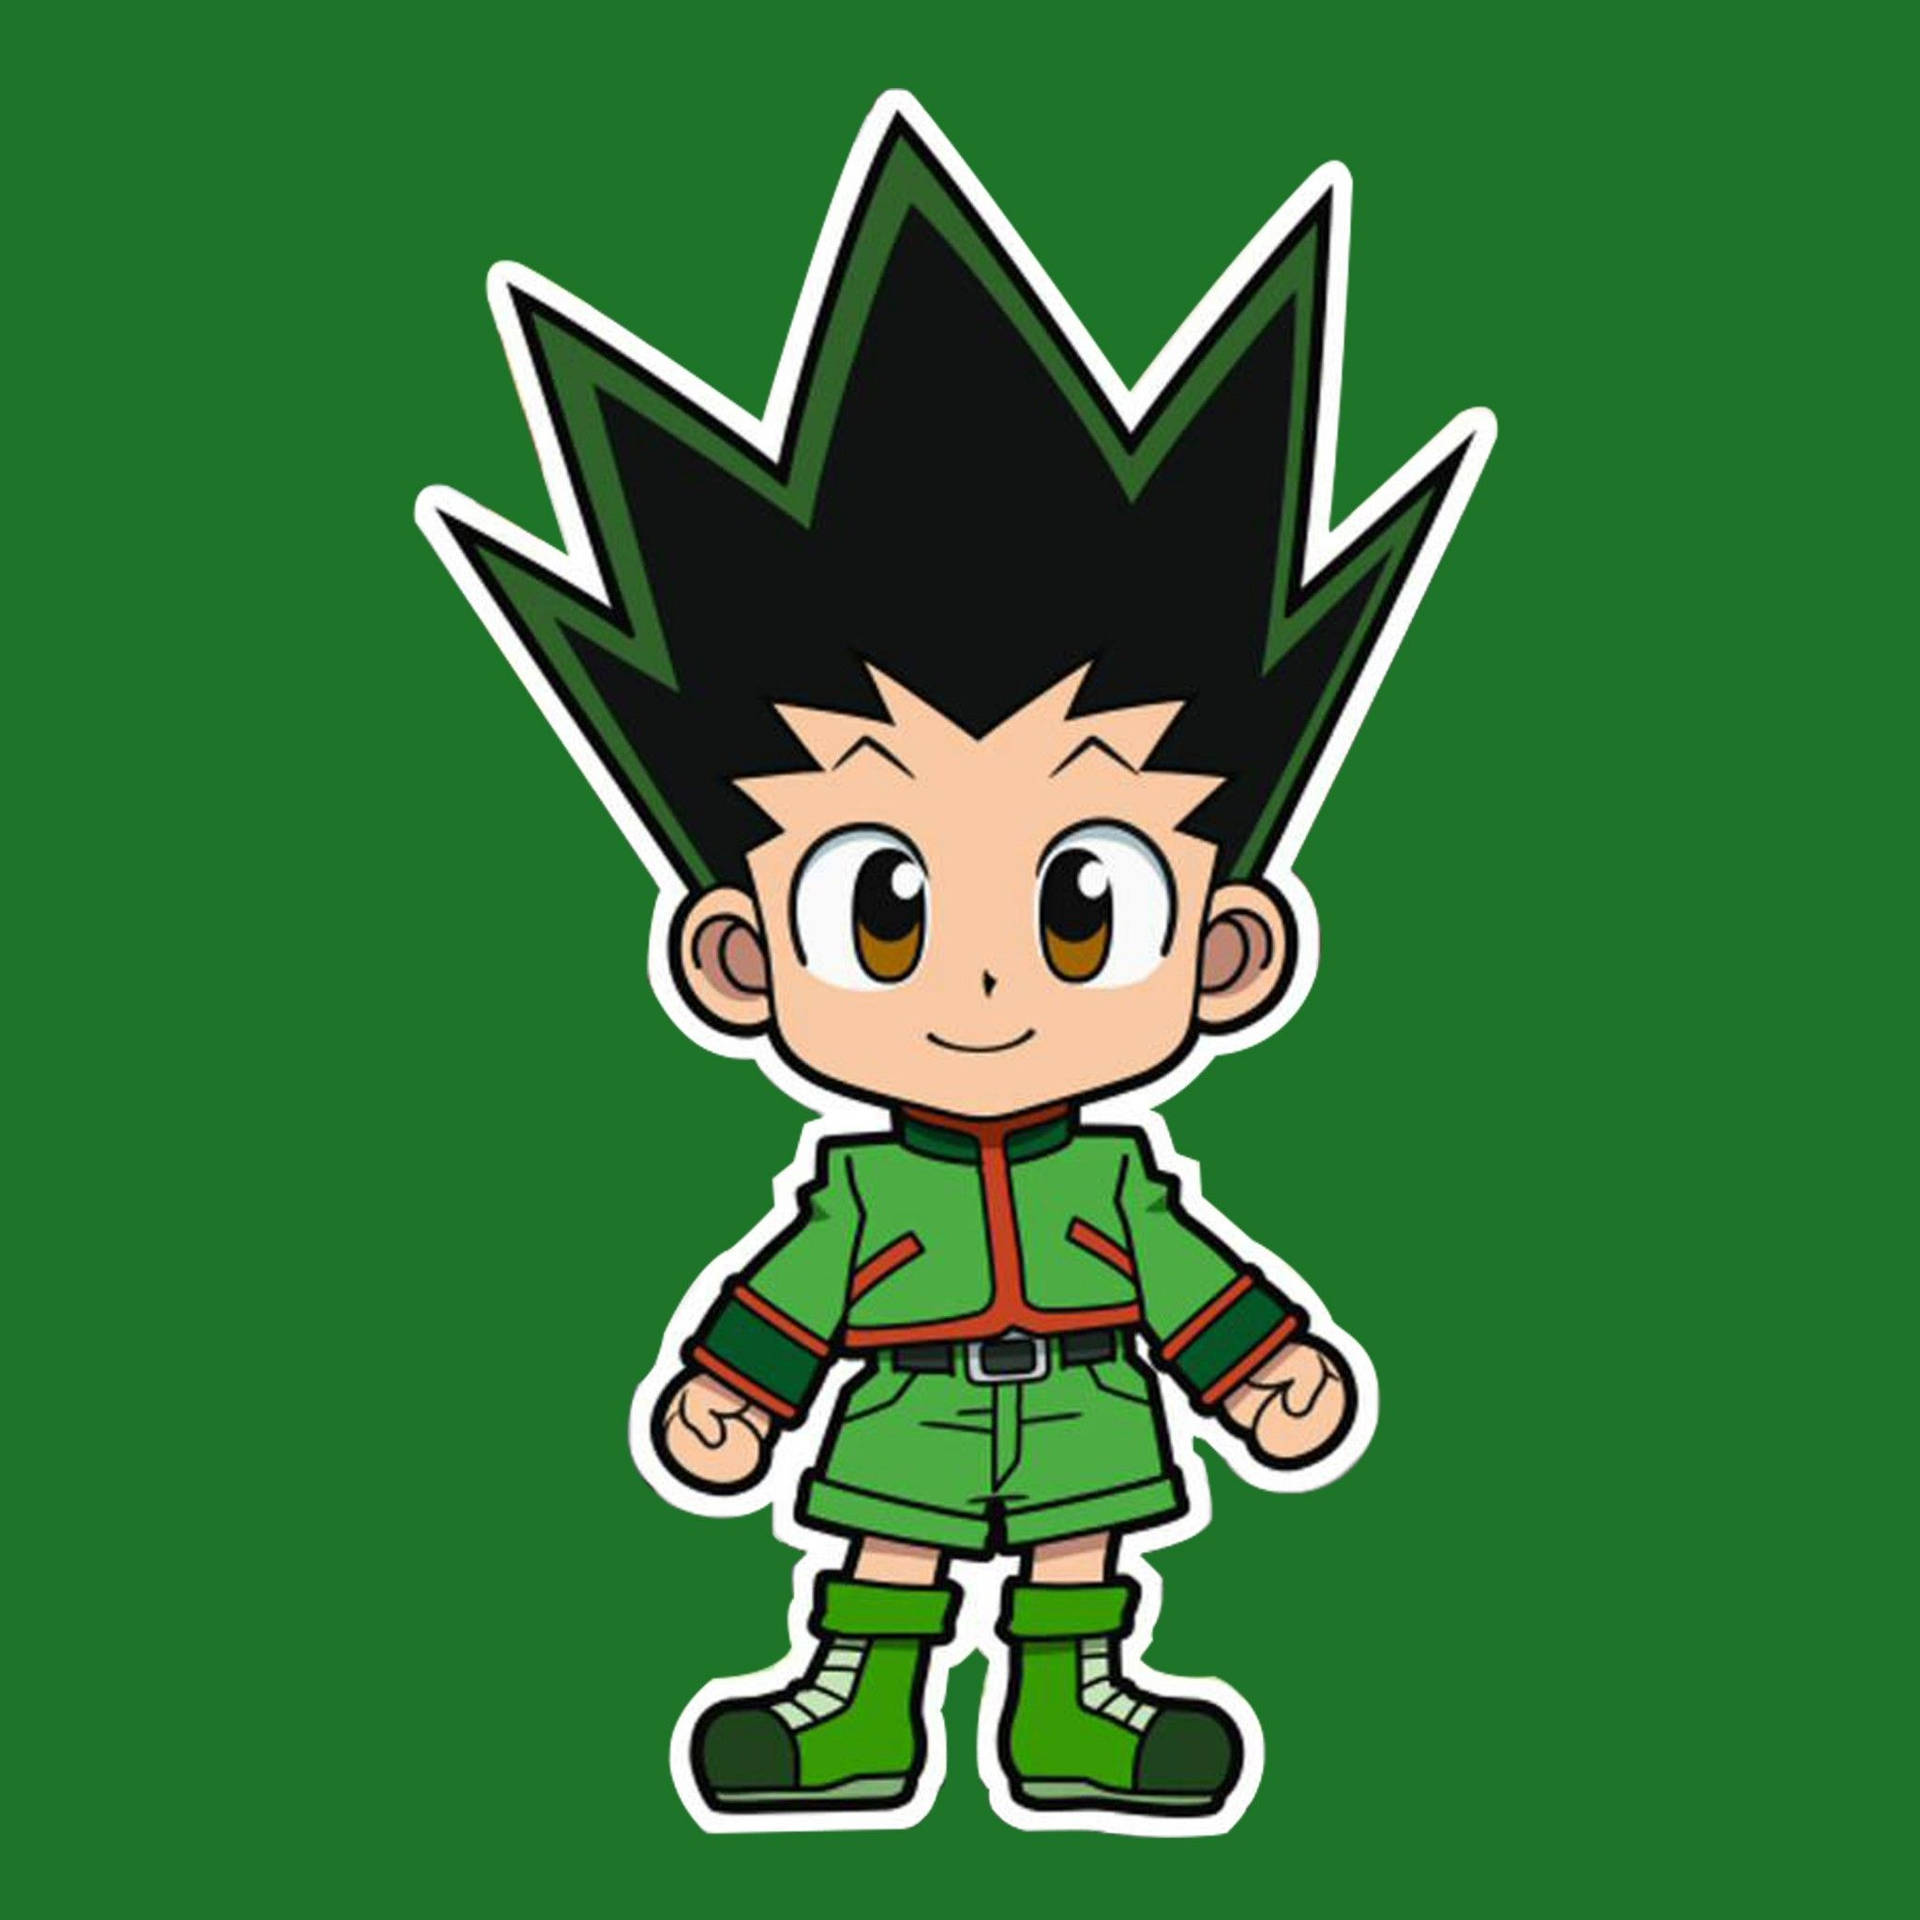 Chibi Animated Gon In Green Background